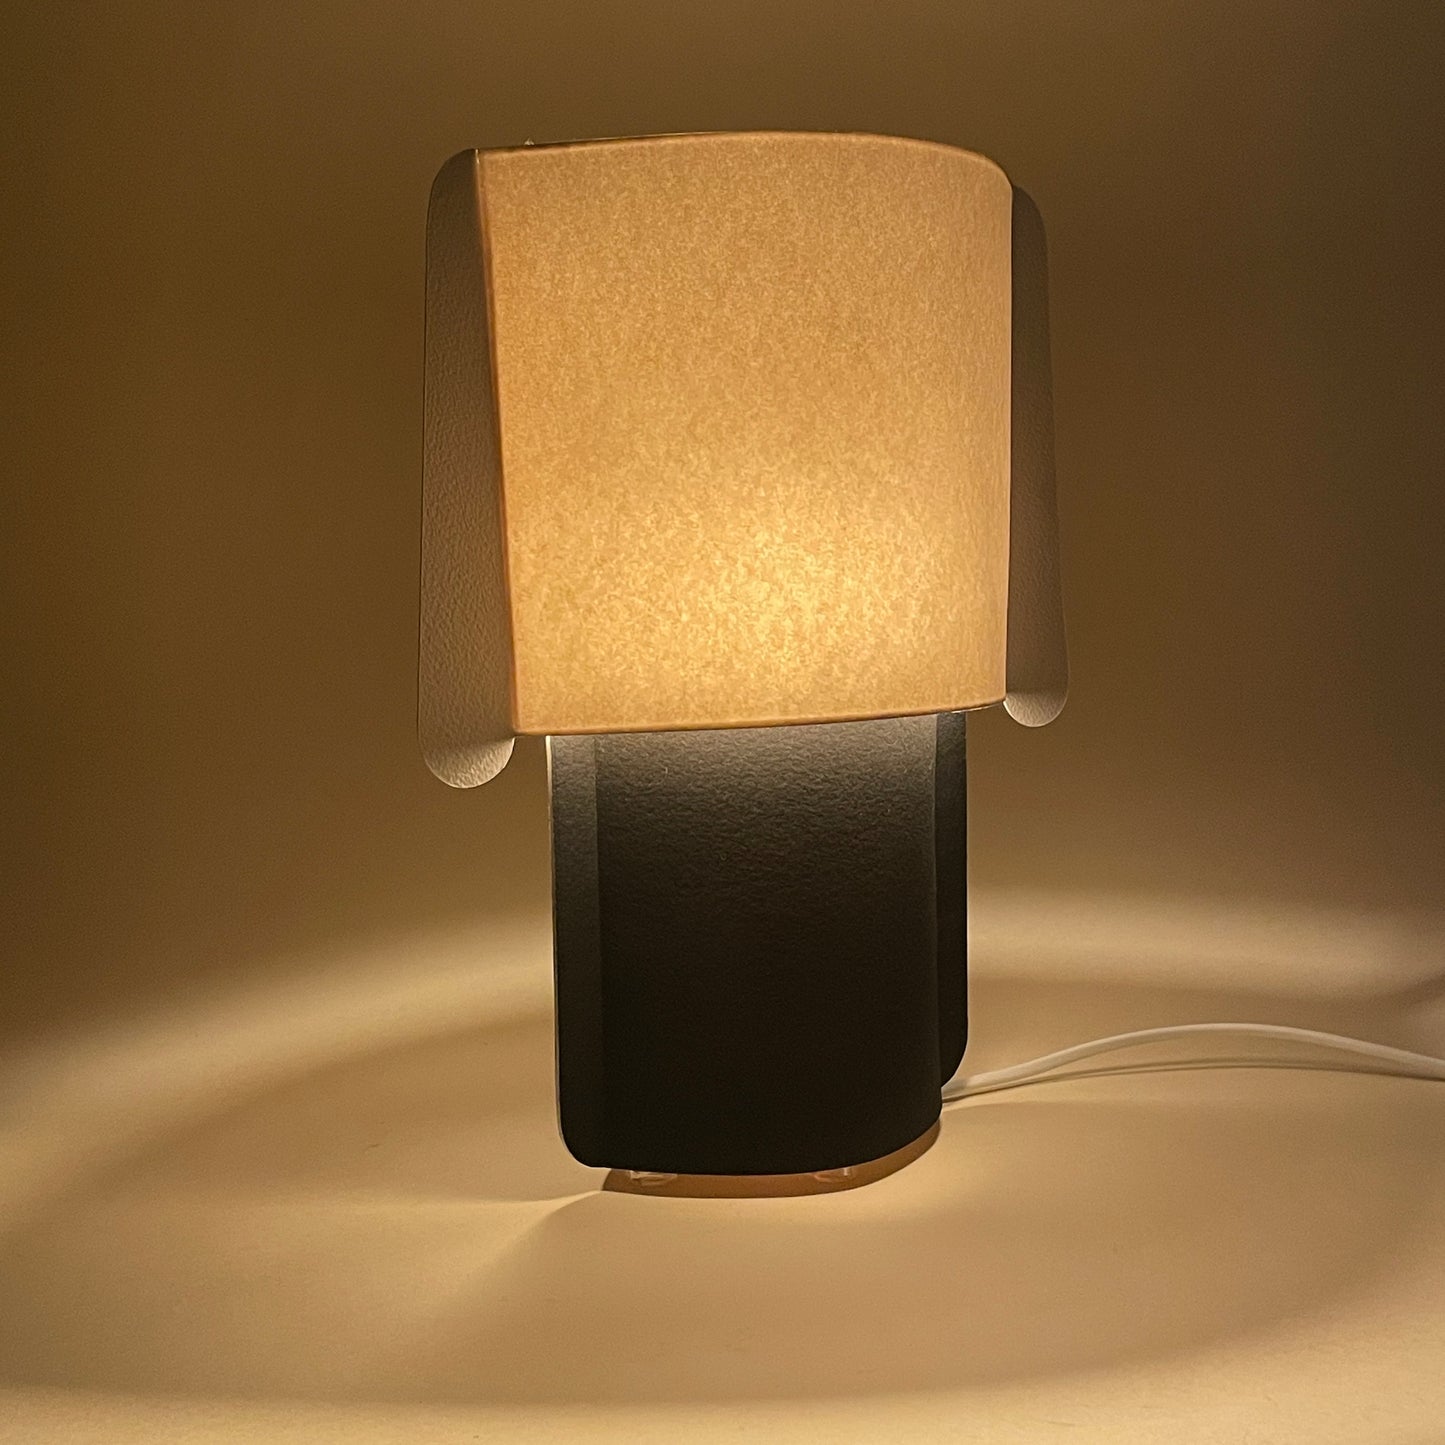 Black and white Aquarelle Lamp by Adrian Bursell